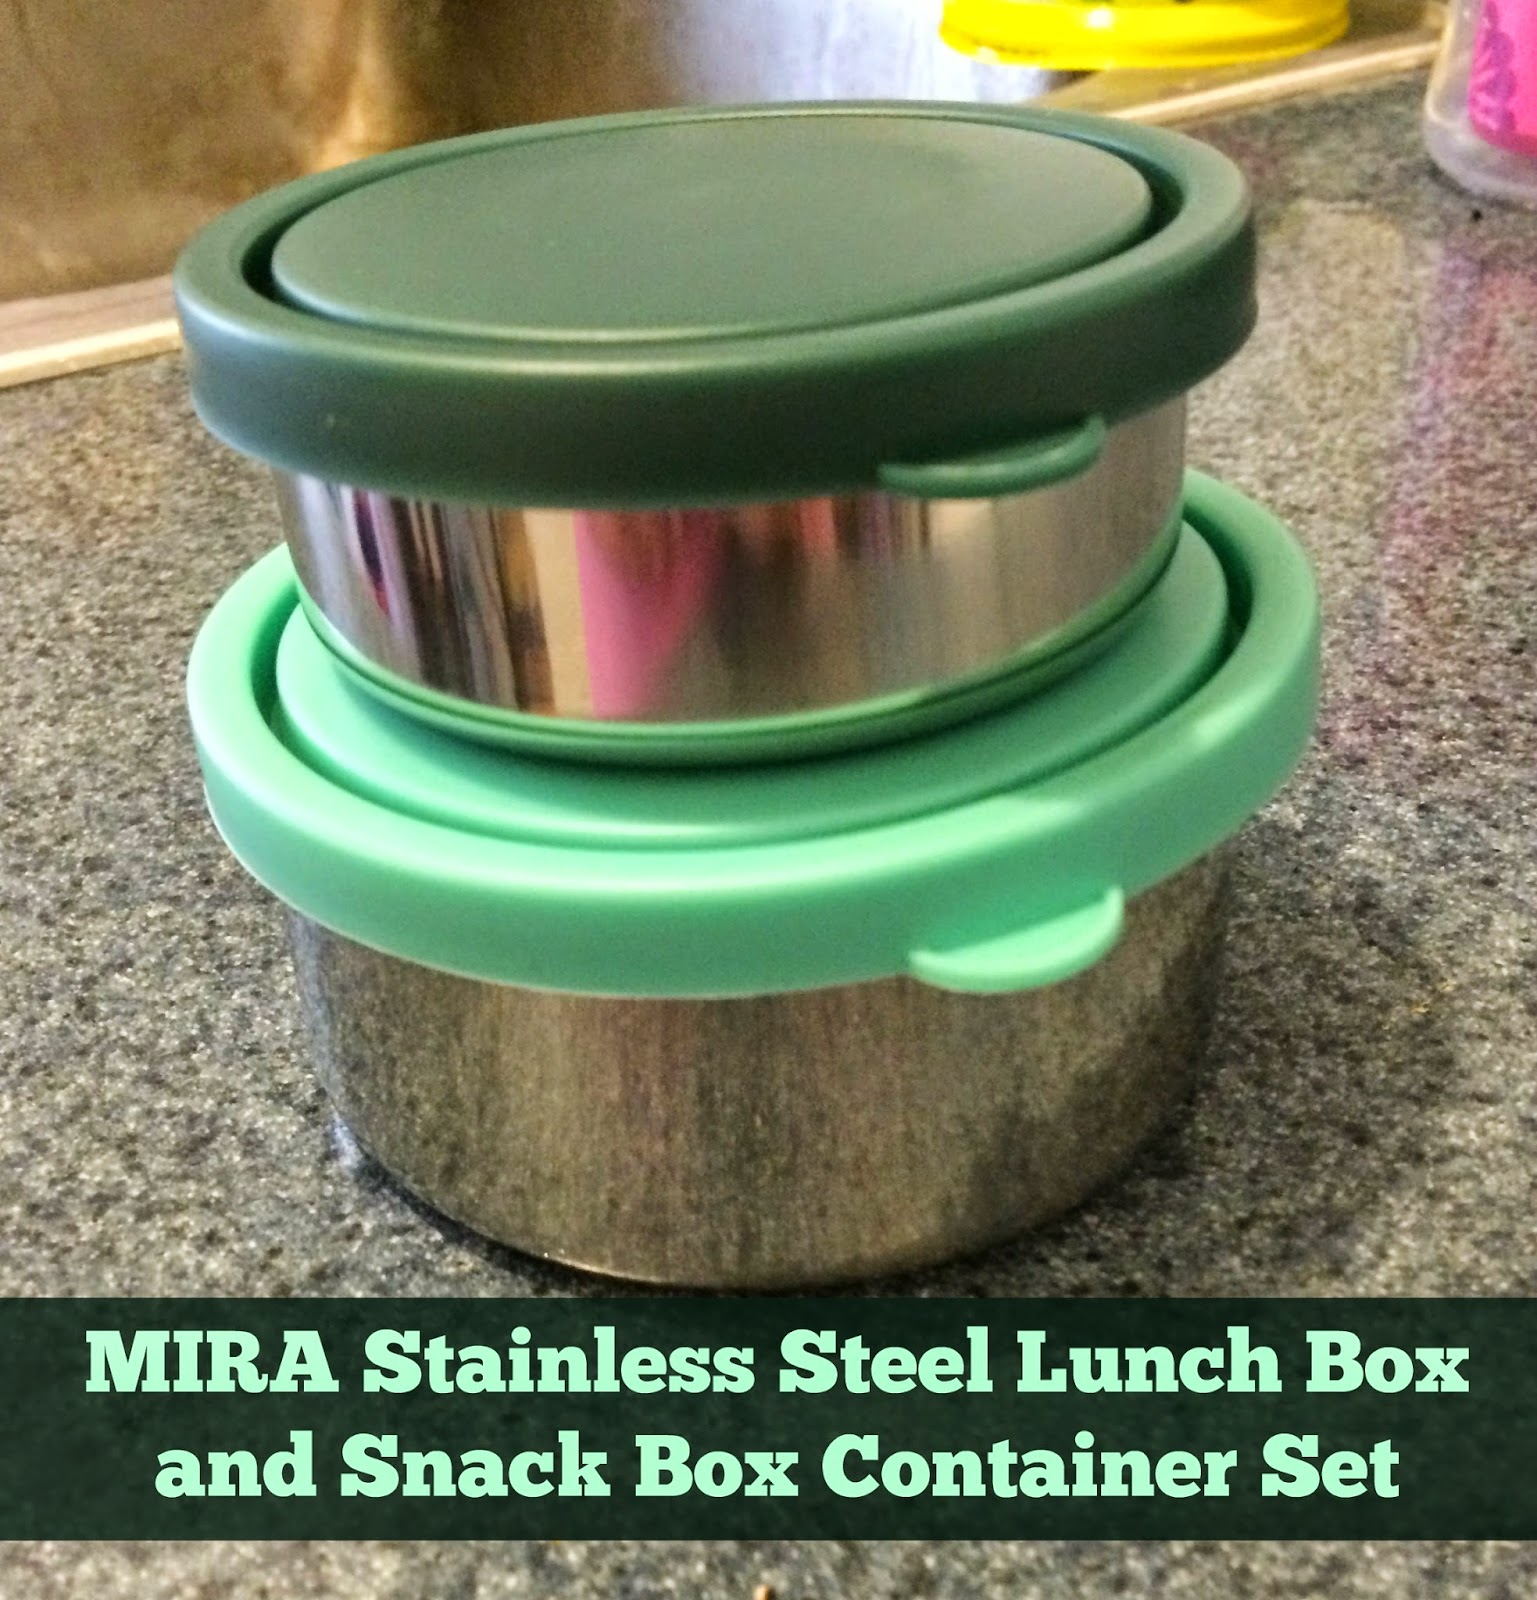 MIRA Stainless Steel Lunch Box and Snack Box Container Set Review